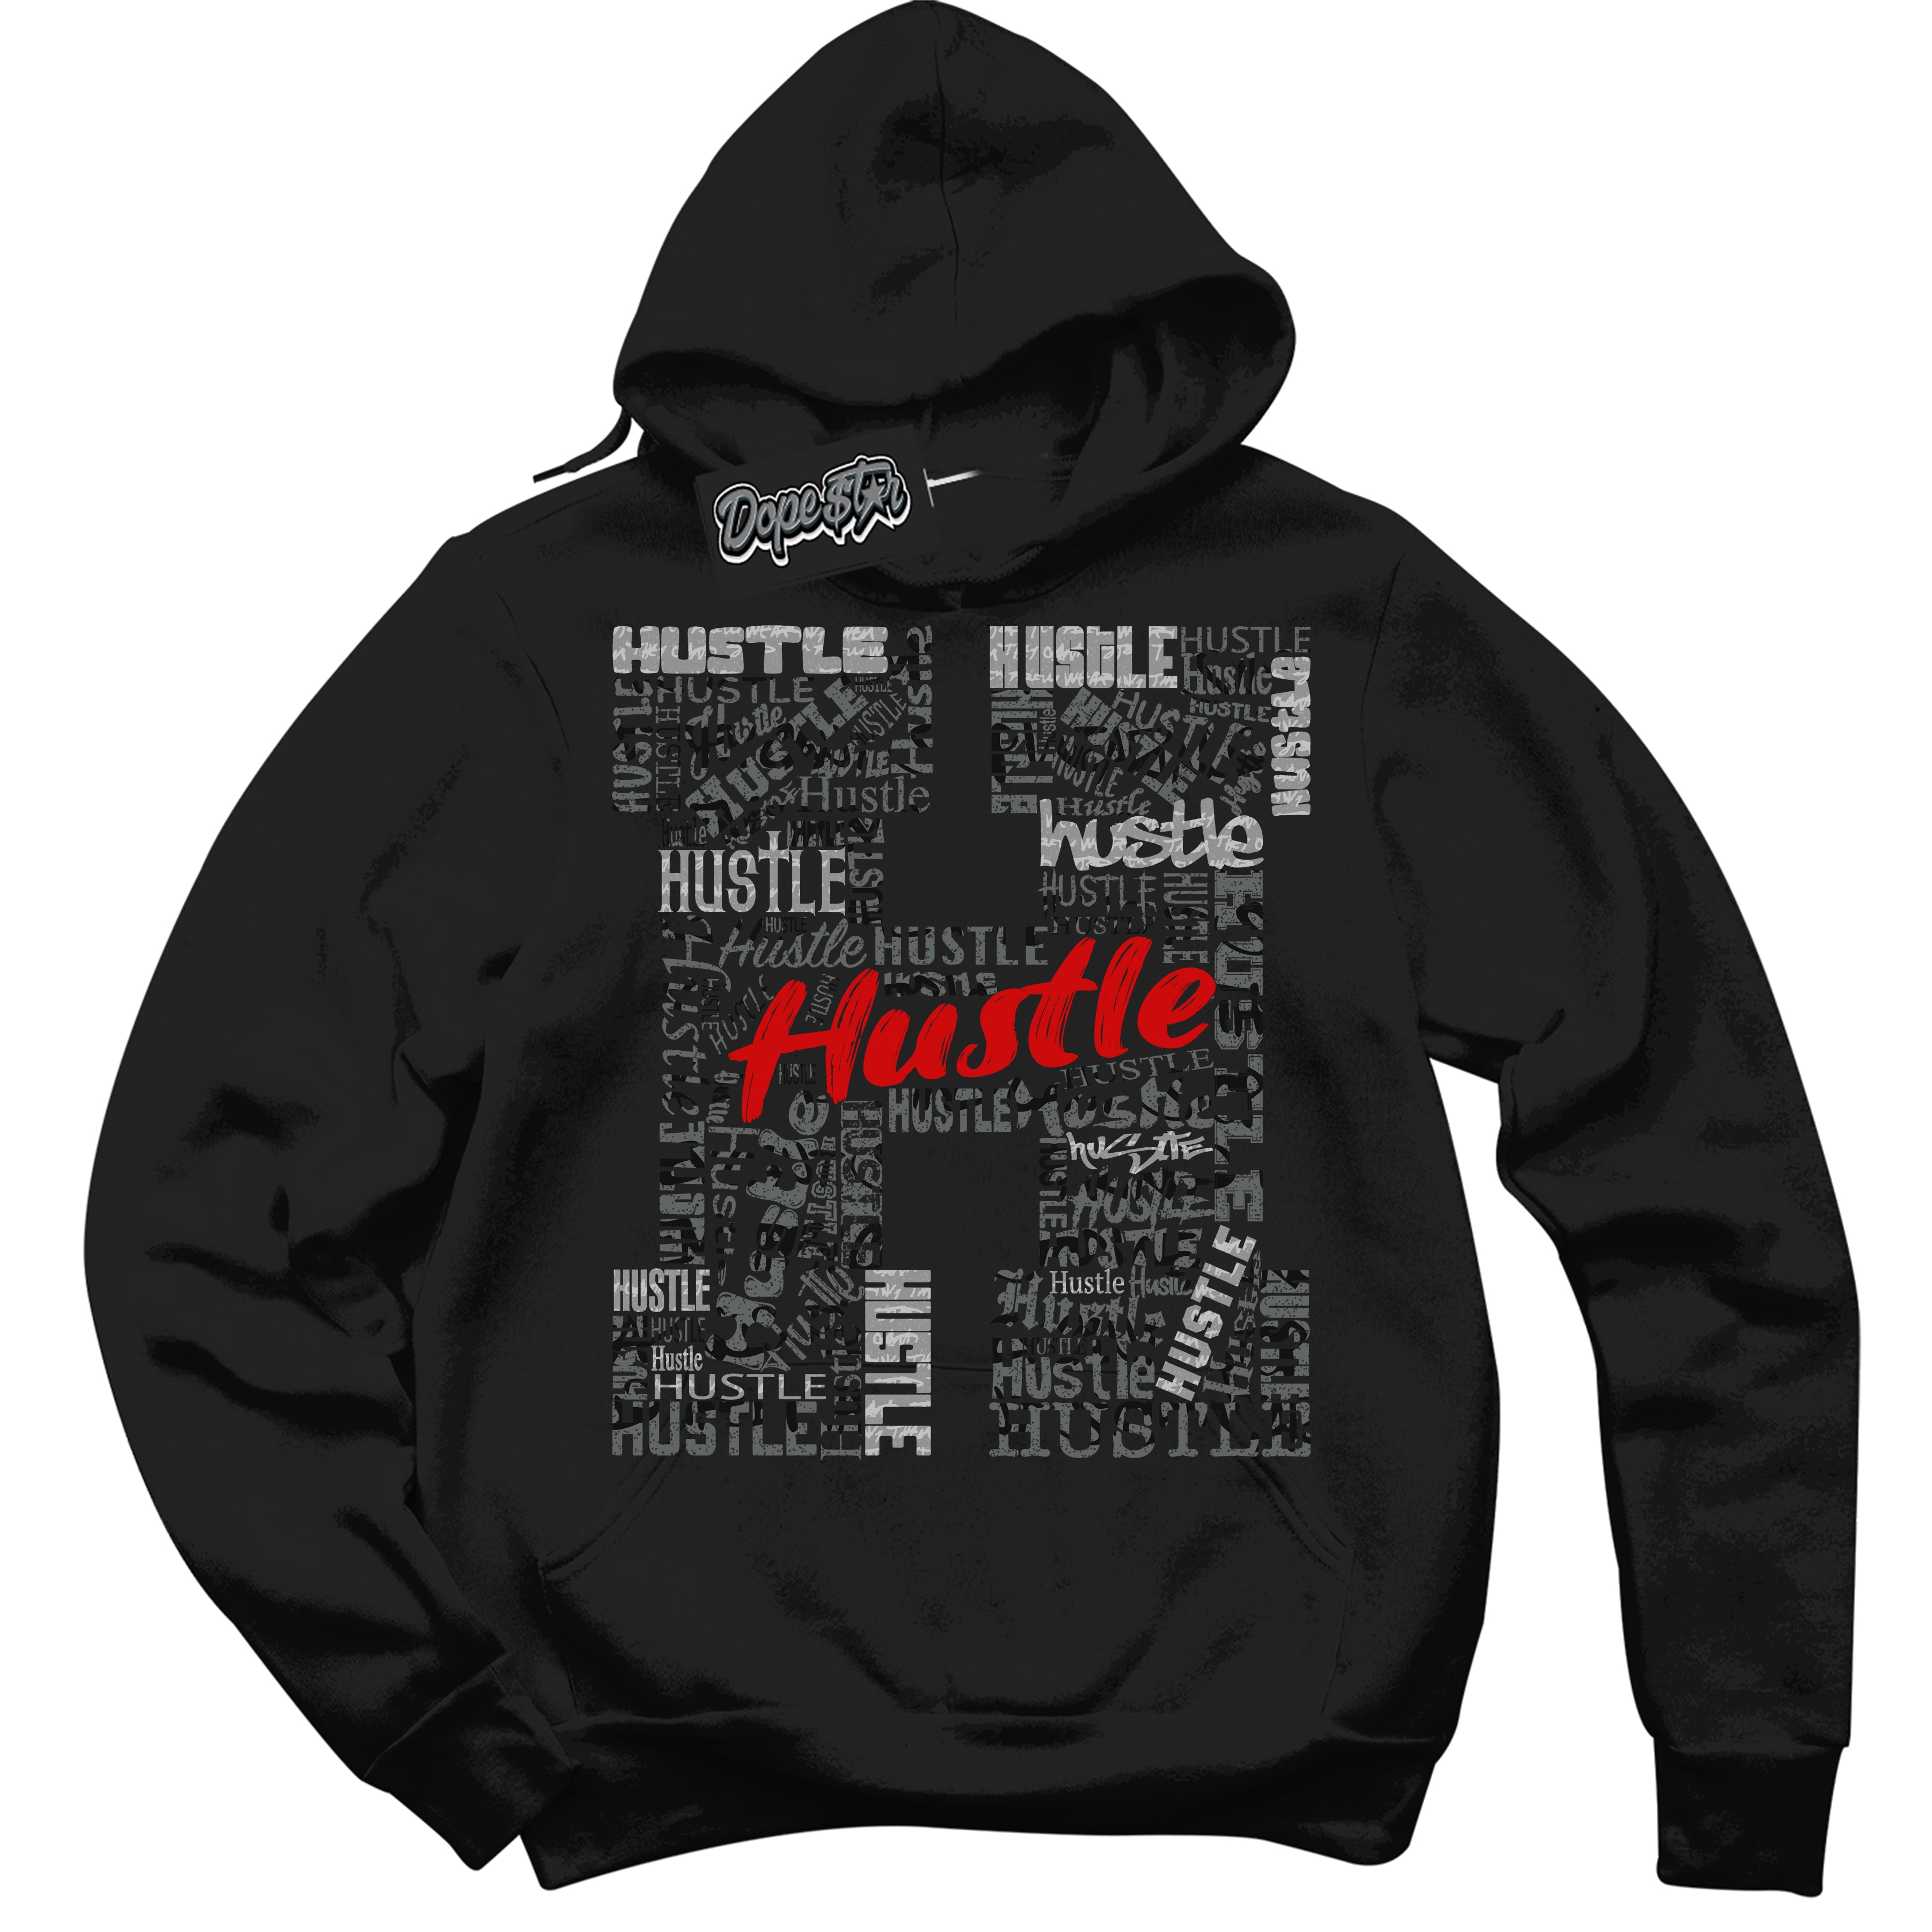 Cool Black Hoodie with “ Hustle H ”  design that Perfectly Matches Rebellionaire 1s Sneakers.